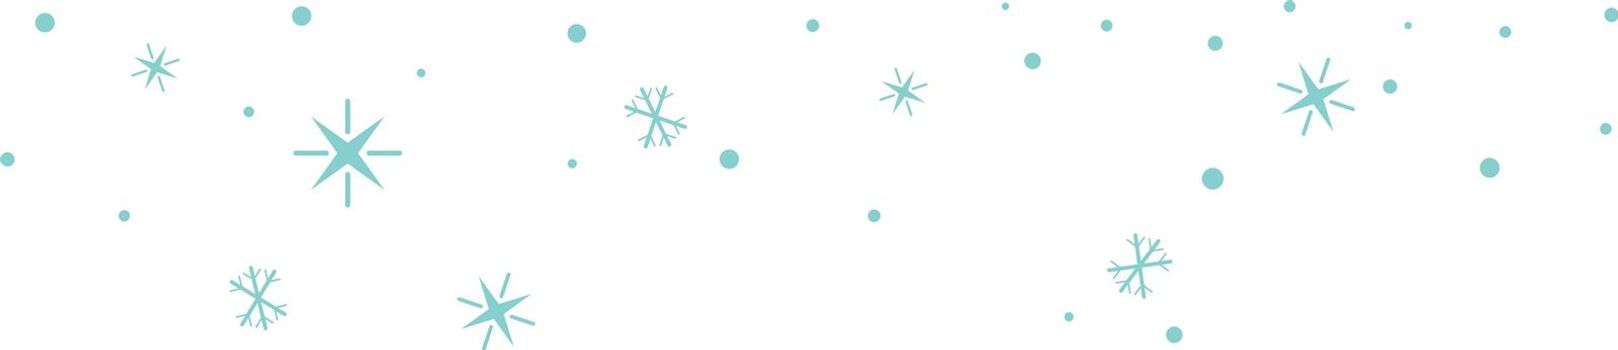 Blue snowflakes falling. Winter snow simple pattern